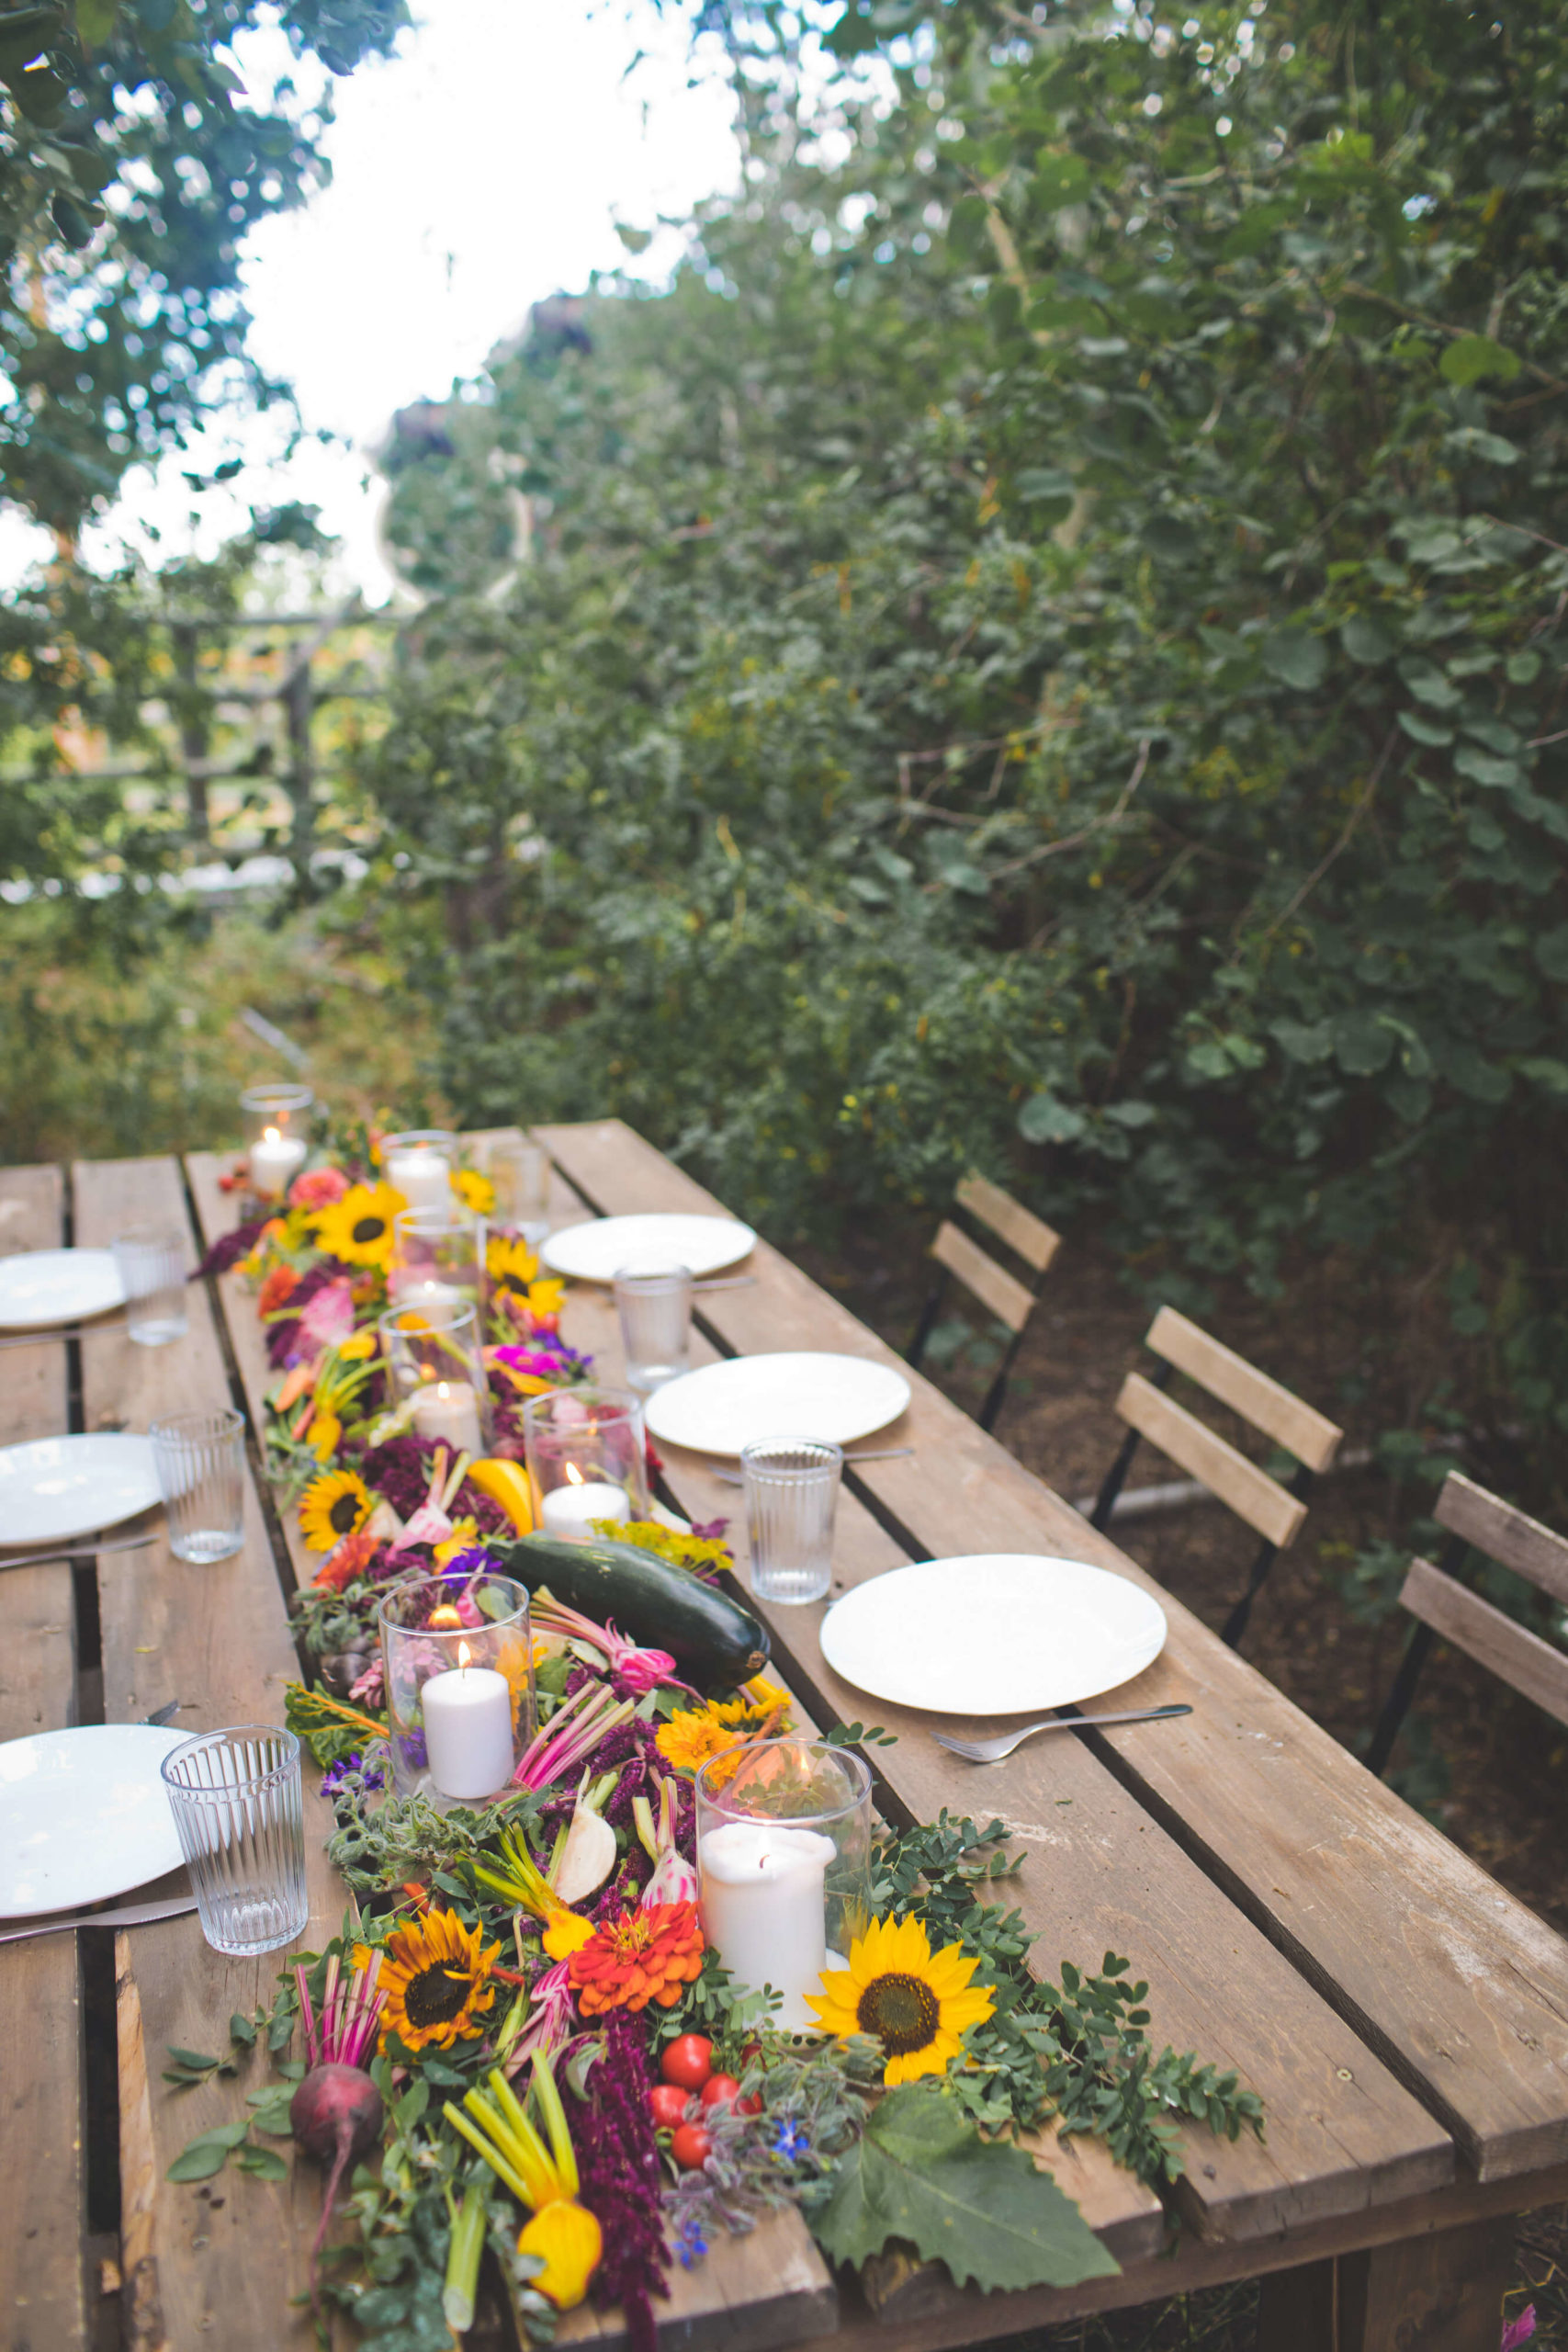 A wooden table adorned with flowers and plates, perfect for farm weddings and events.